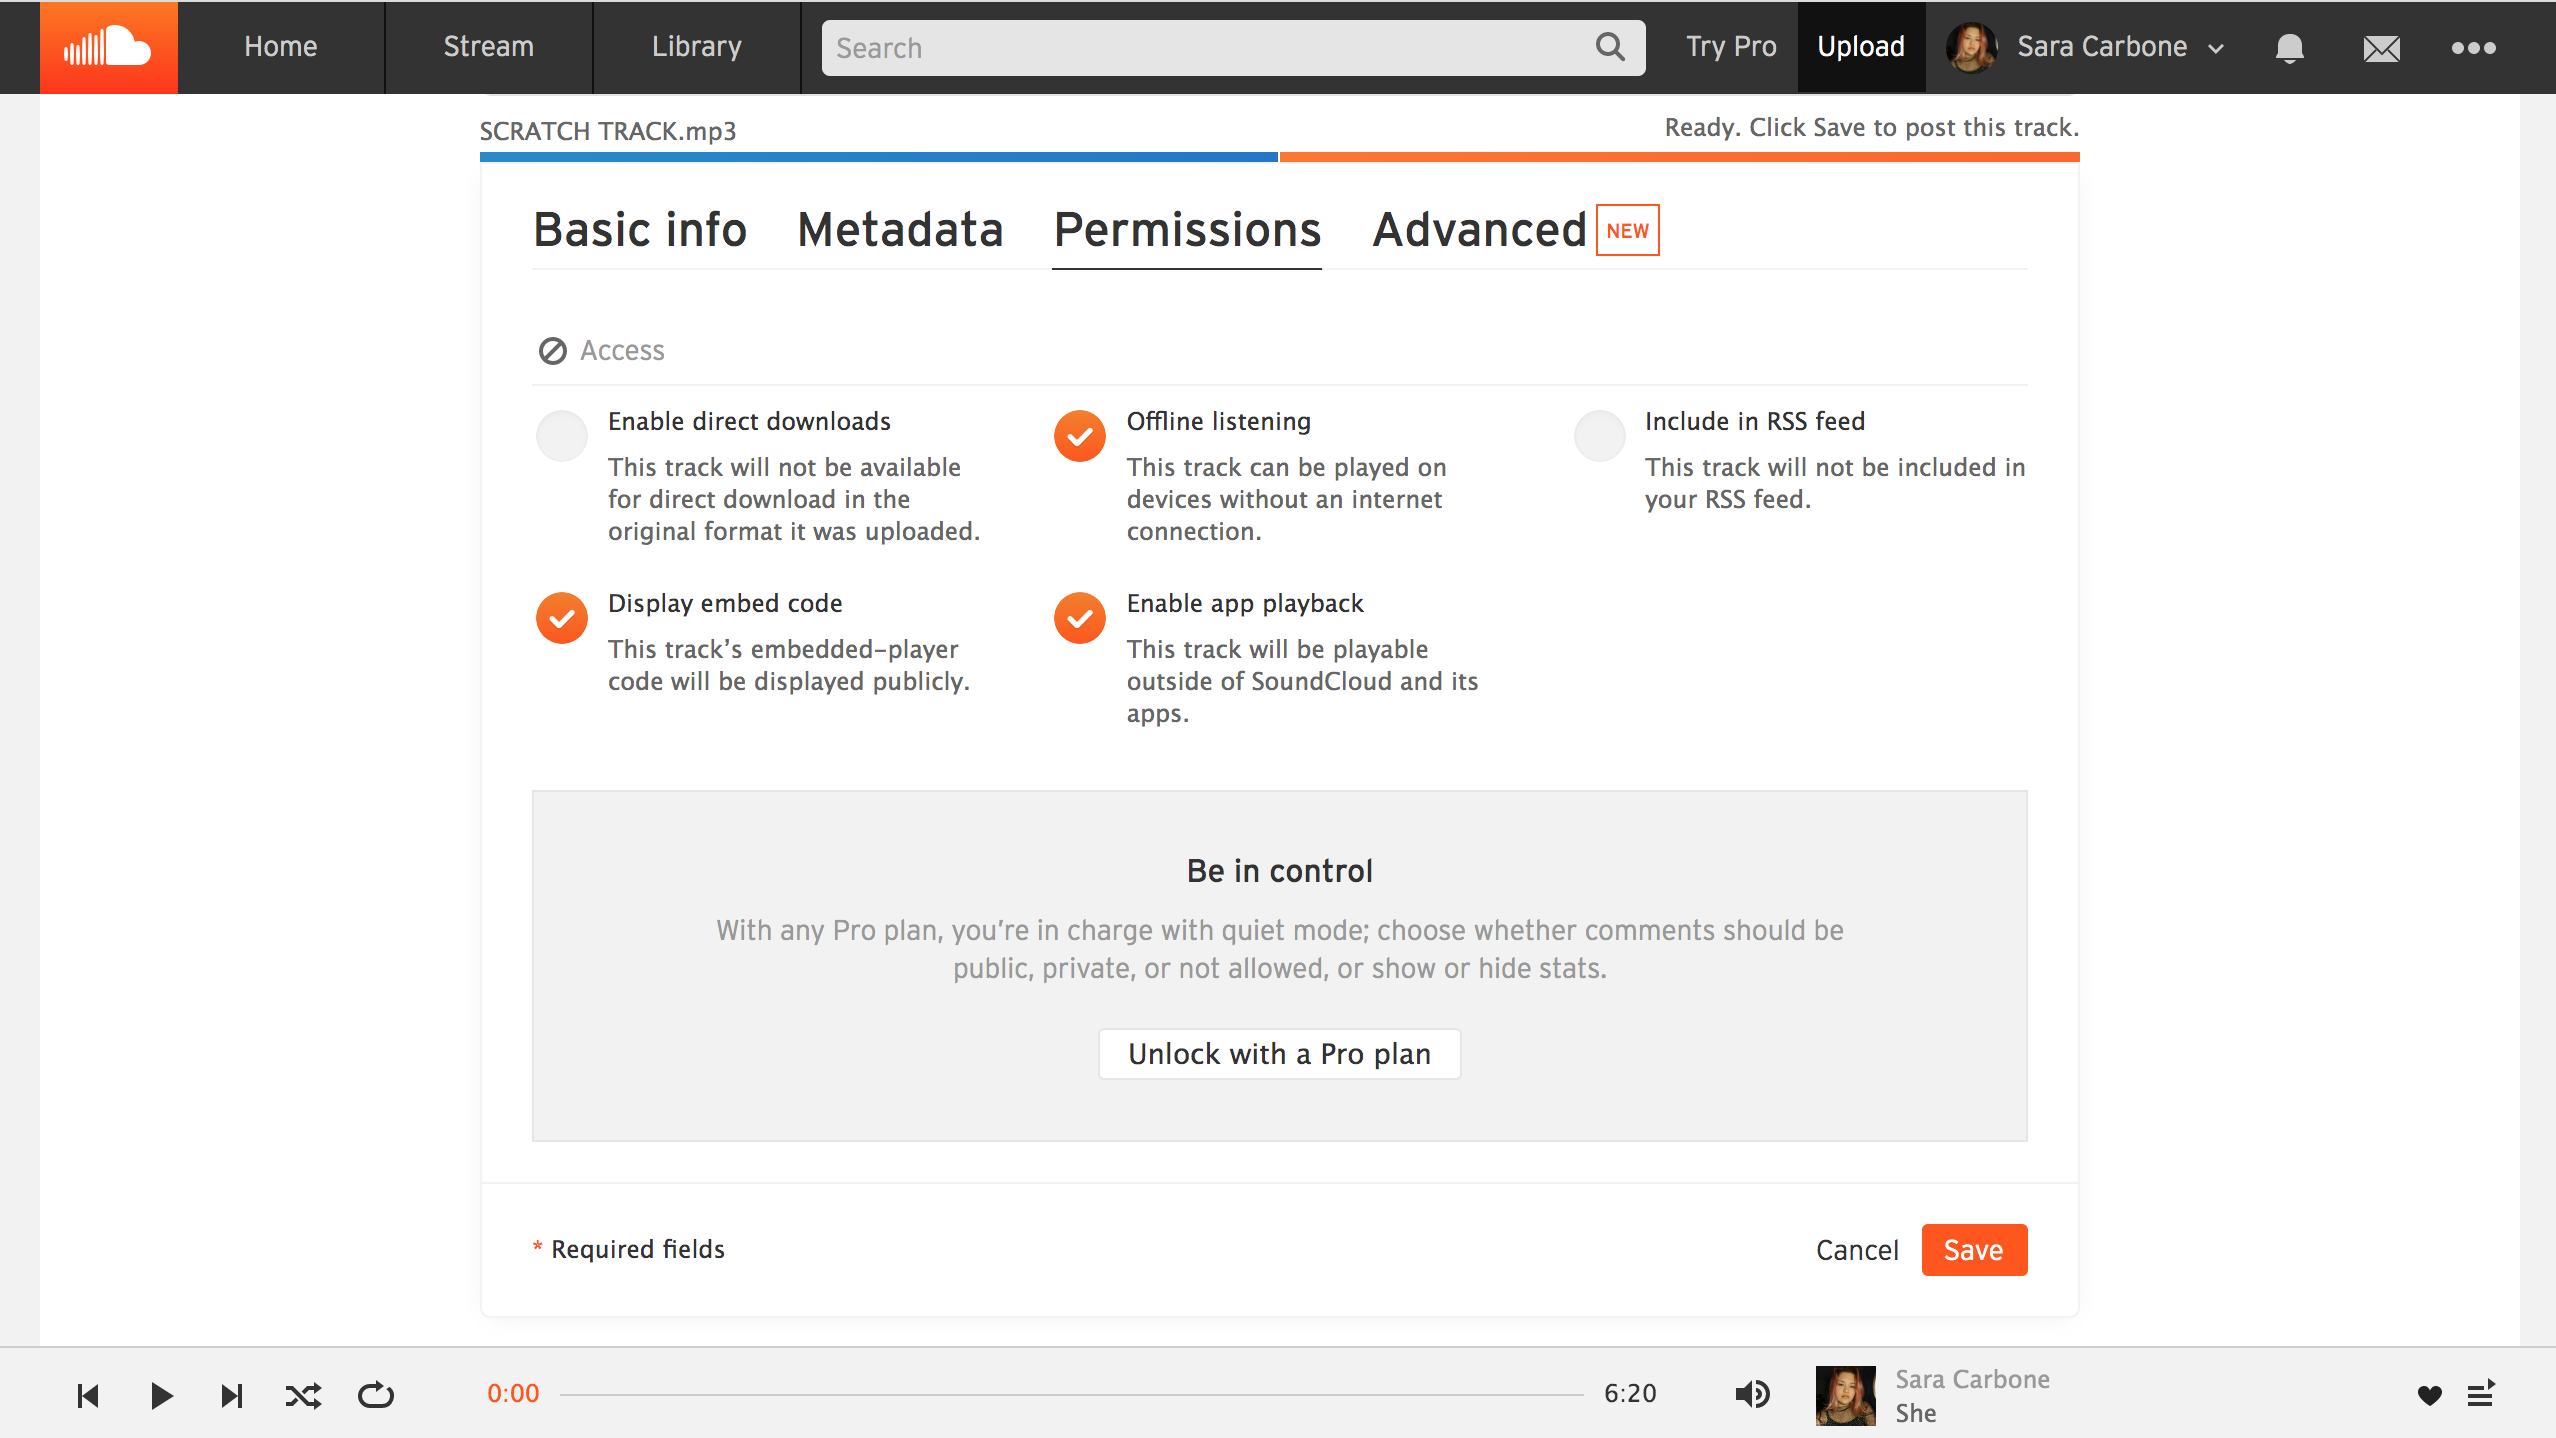 Screenshot of SoundCloud interface permissions tab of uploading a track.